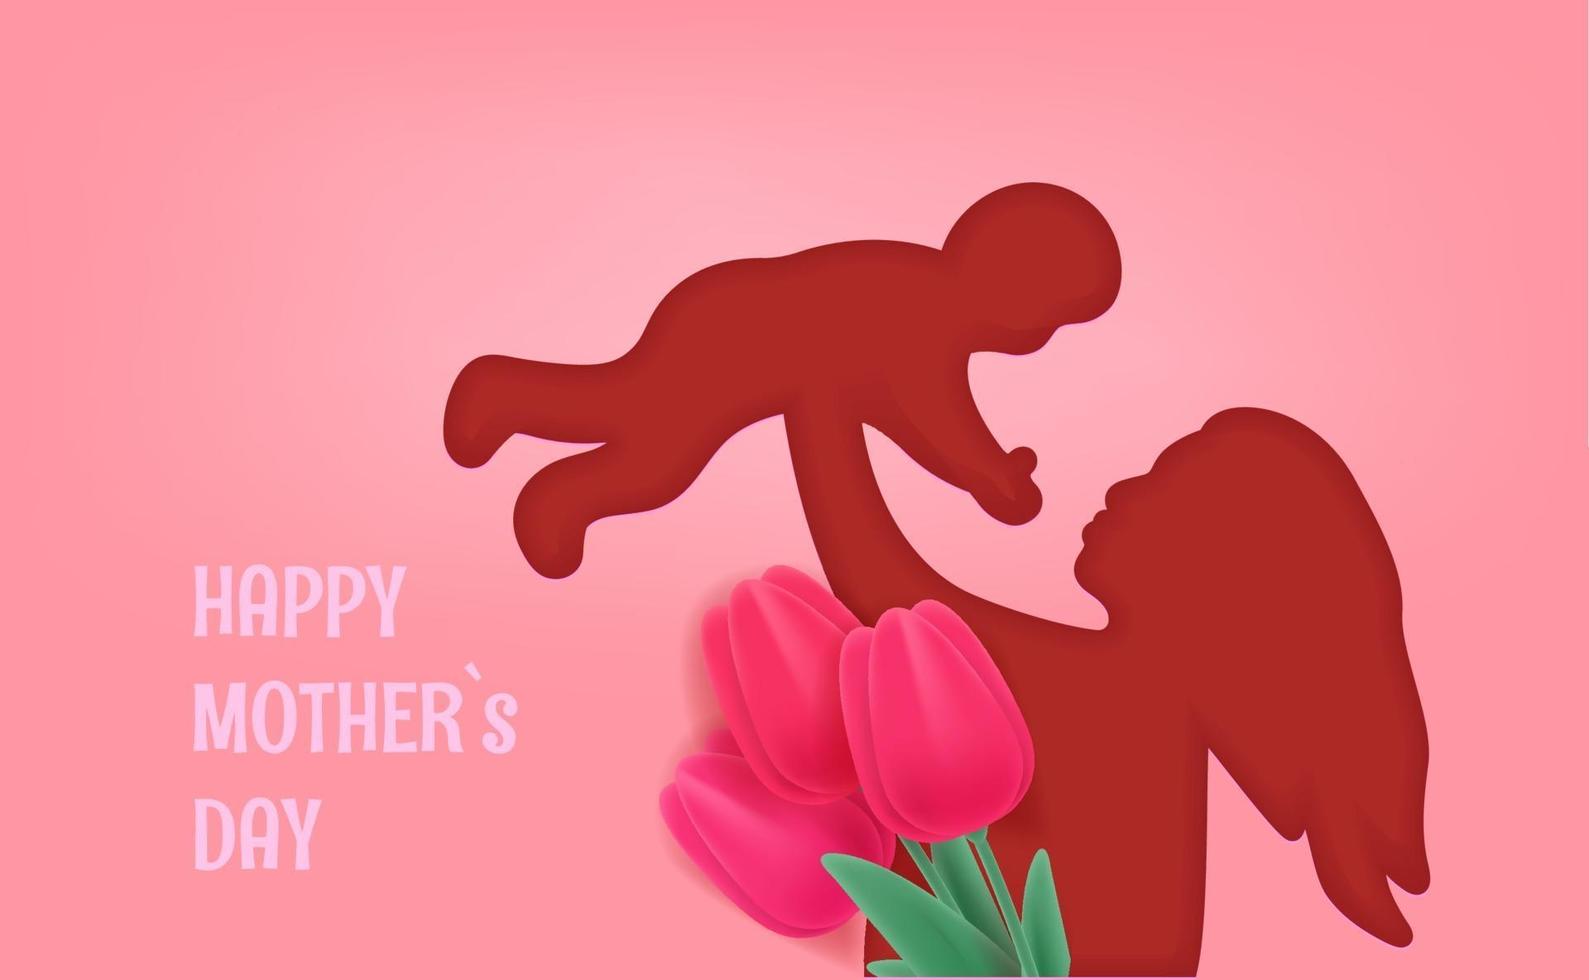 Woman holding a baby. Happy Mothers day vector banner. Cut out effect with woman silhouette